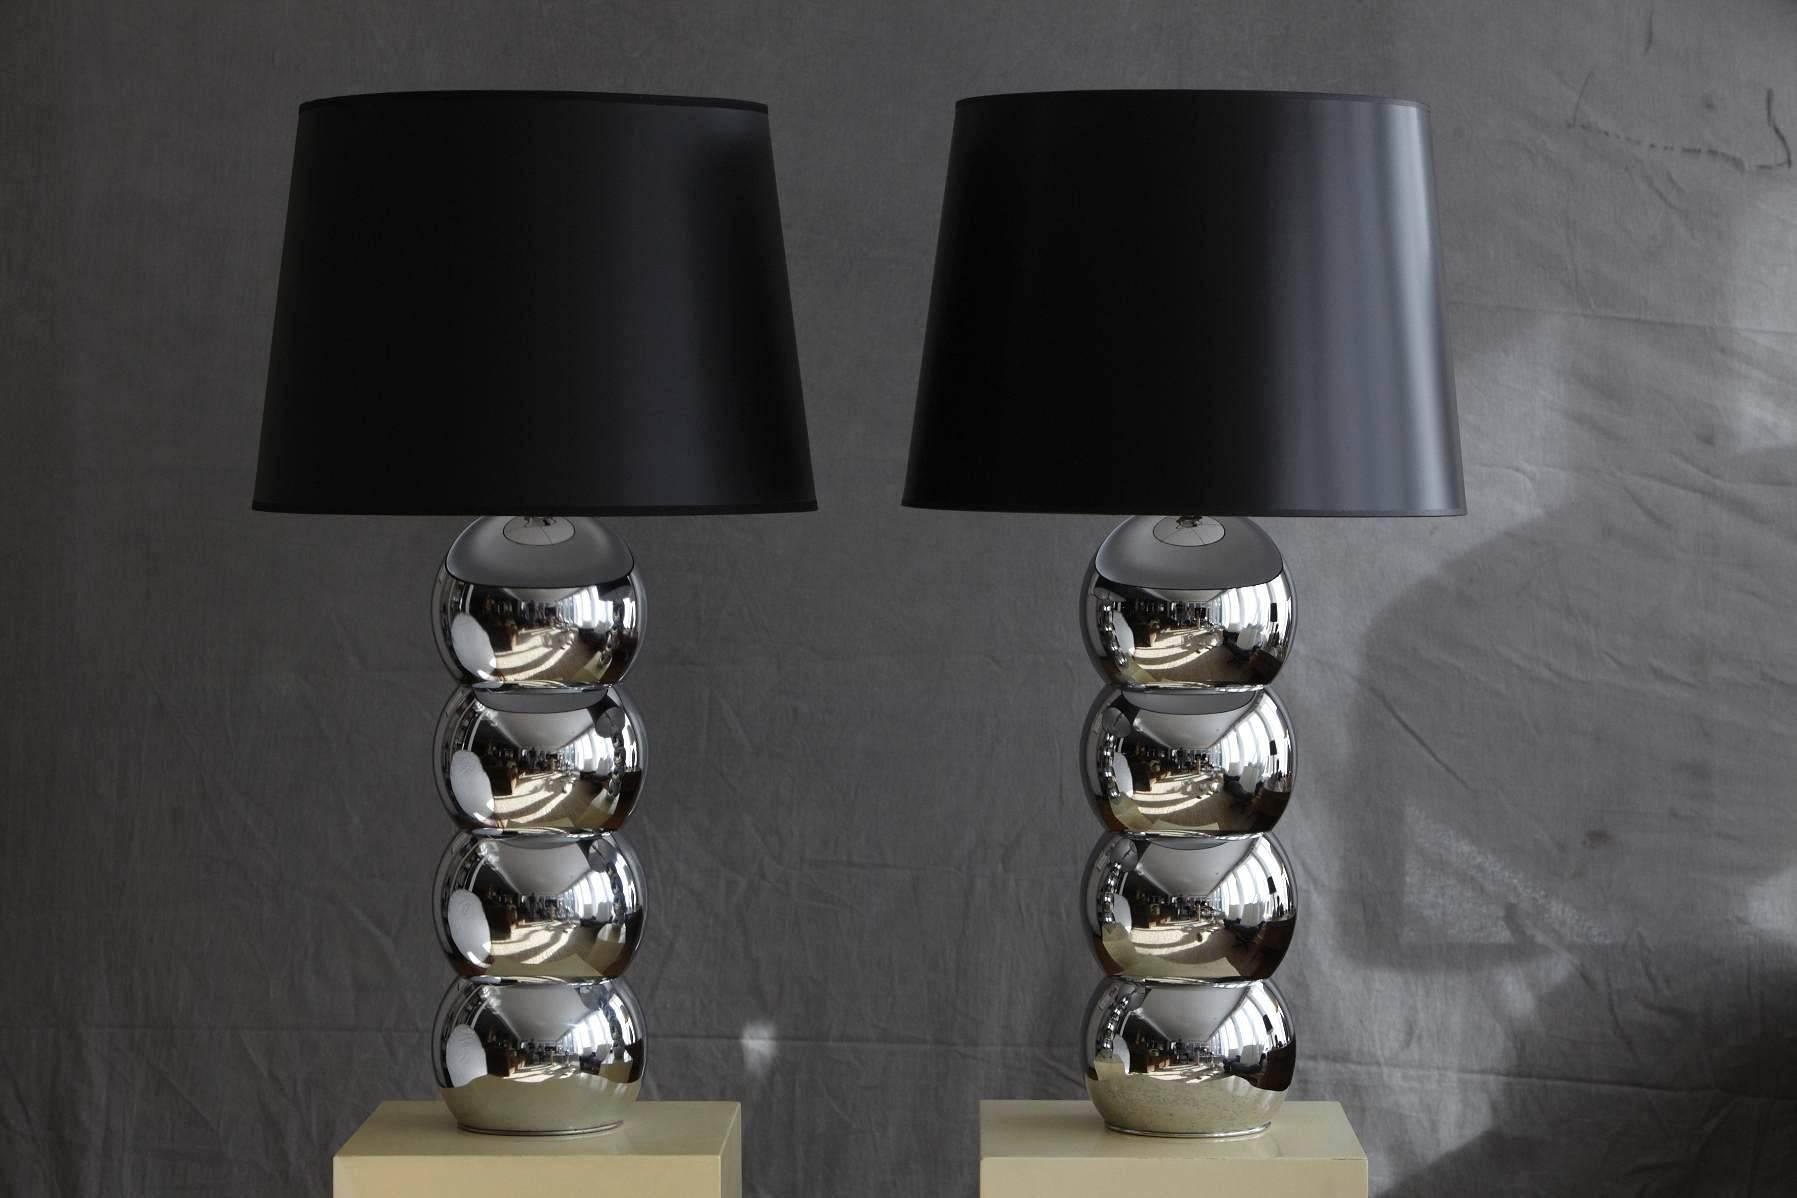 Impressive pair of stacked chrome ball table lamps with brand new black shades designed by George Kovacs, in excellent condition.
Dimensions: Diameter chrome base 6